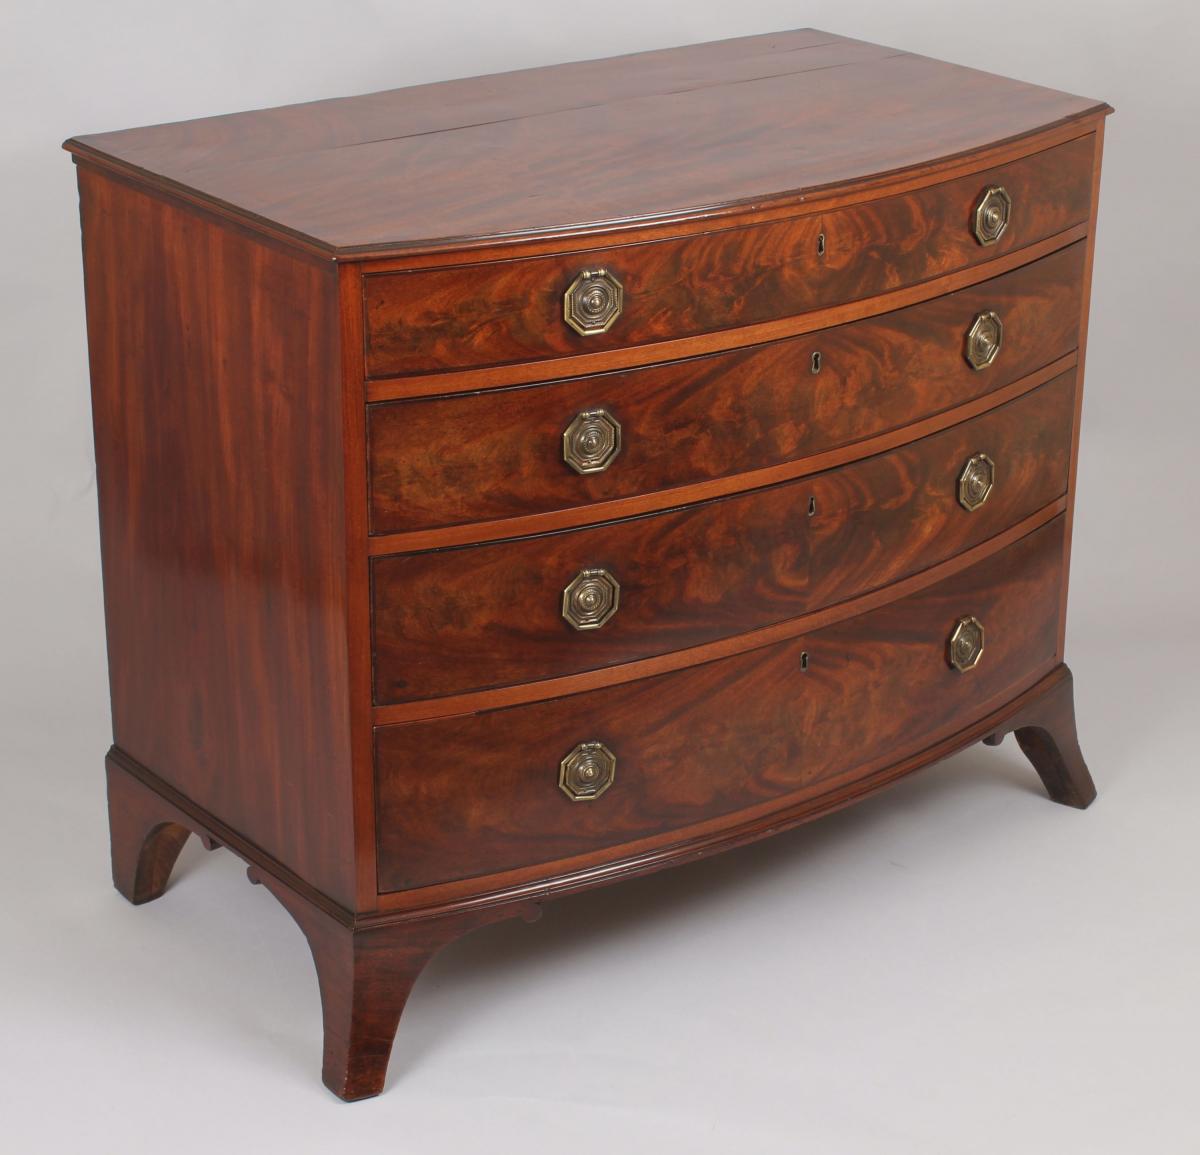 George Iii Period Mahogany Bow Fronted Chest Of Drawers Bada